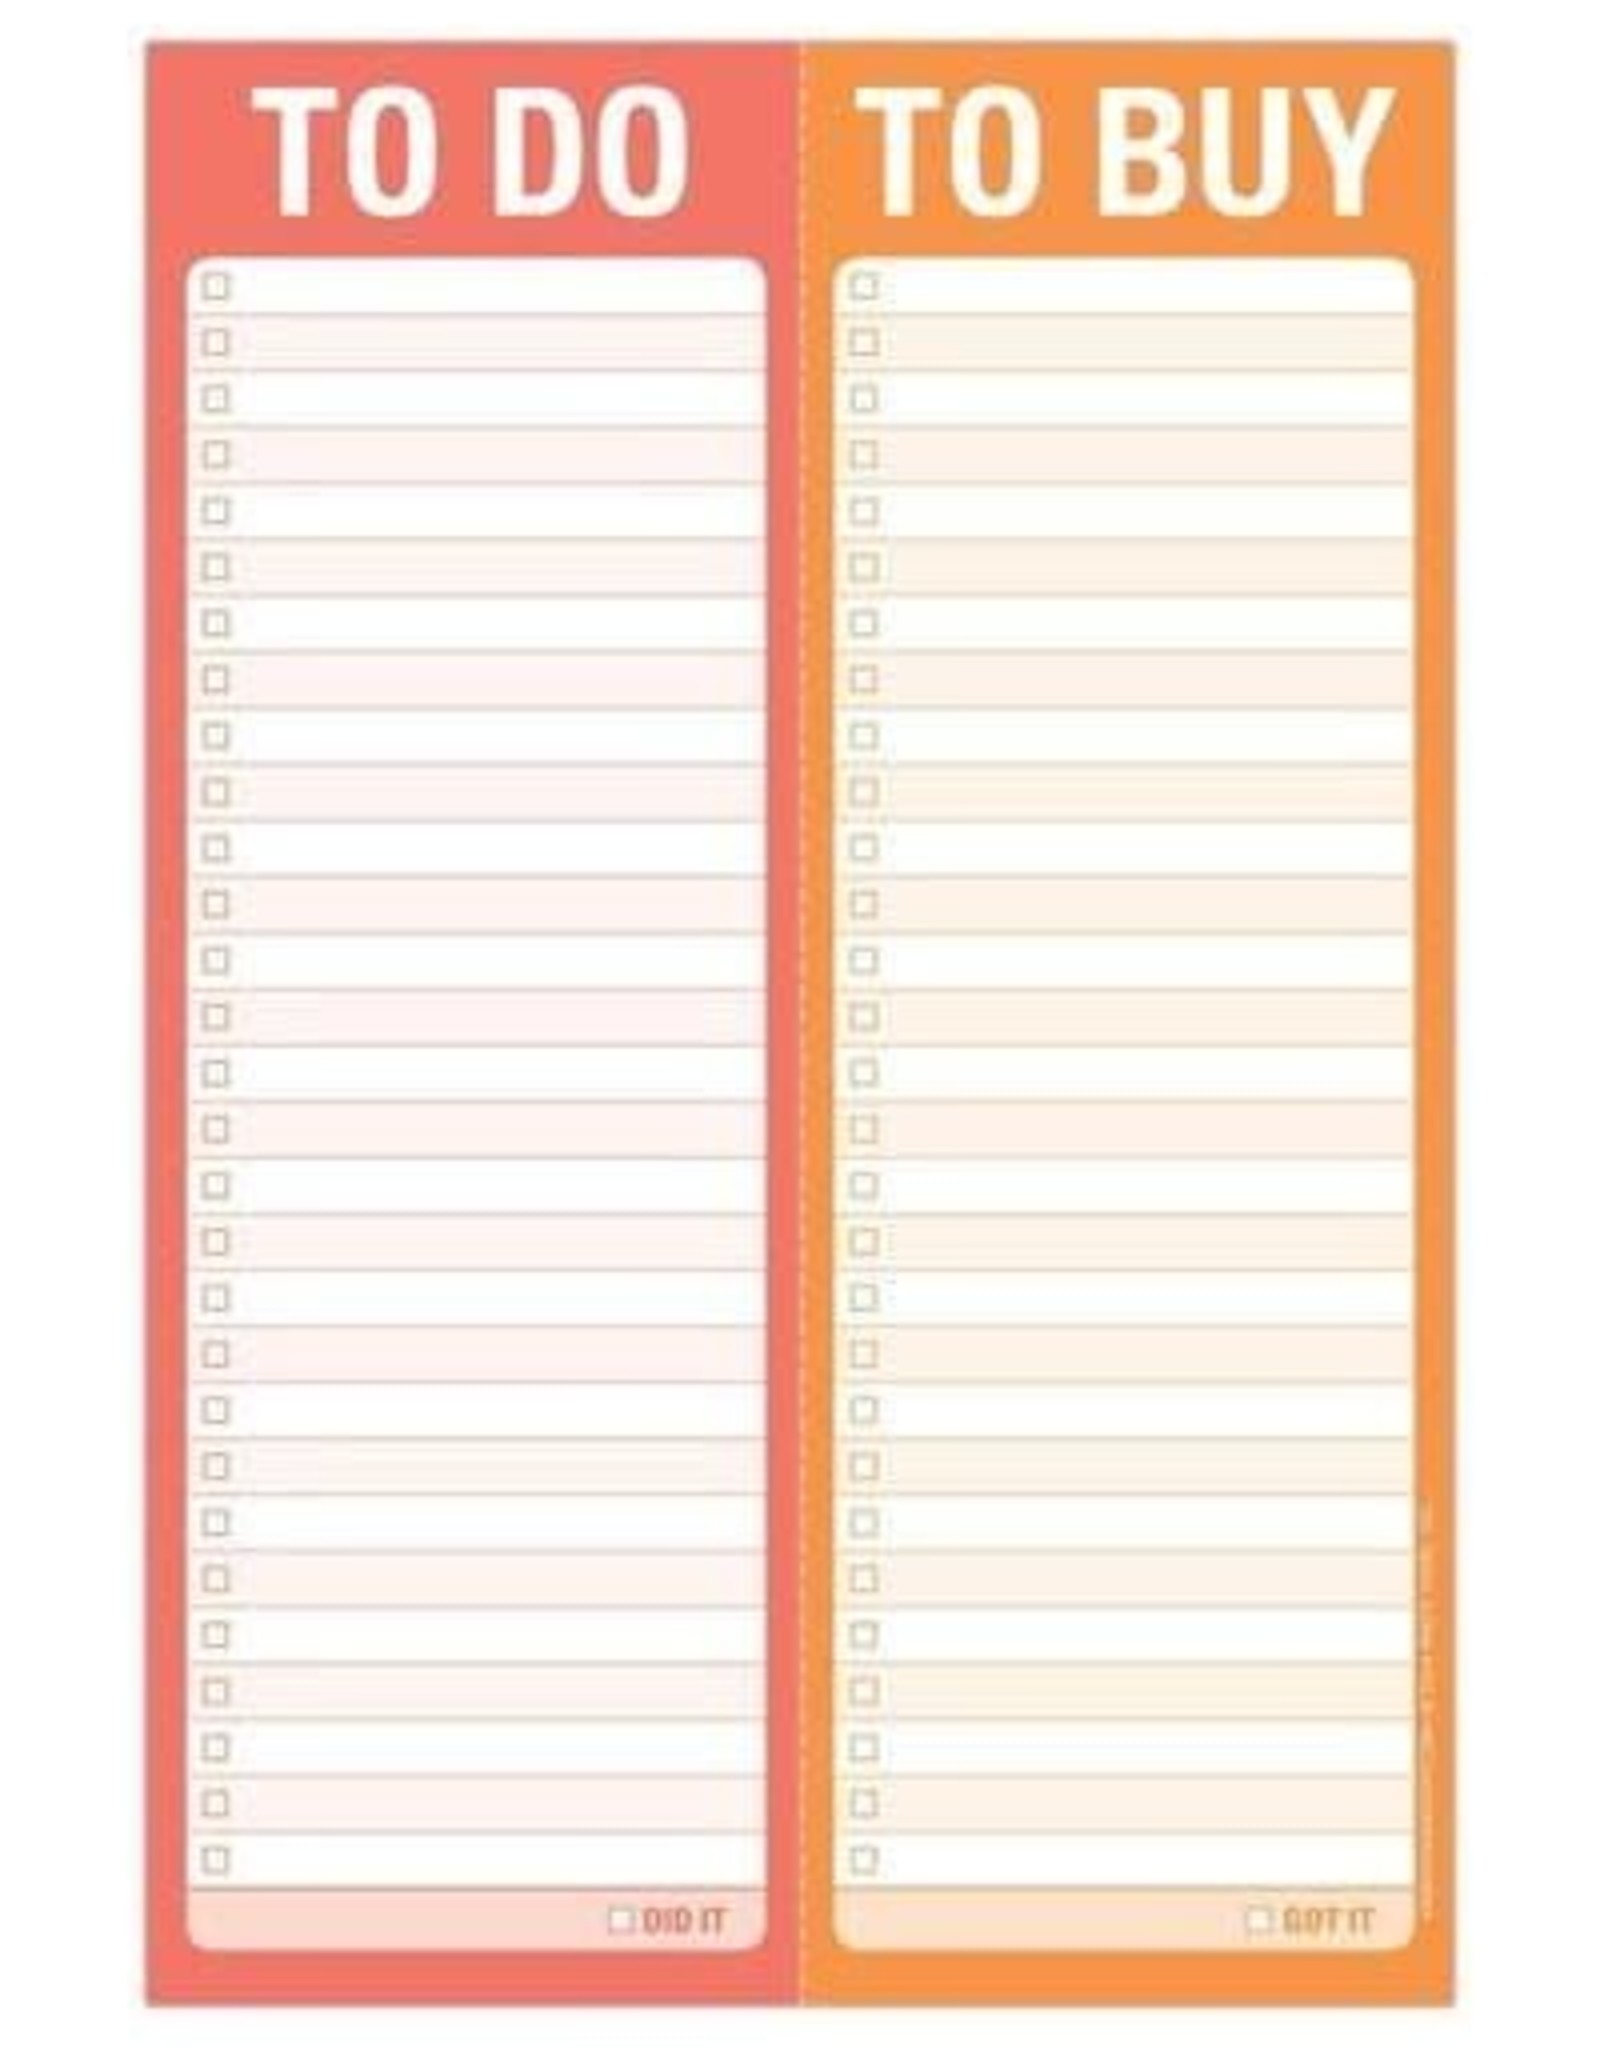 TO DO TO BUY (PERFORATED PAD)